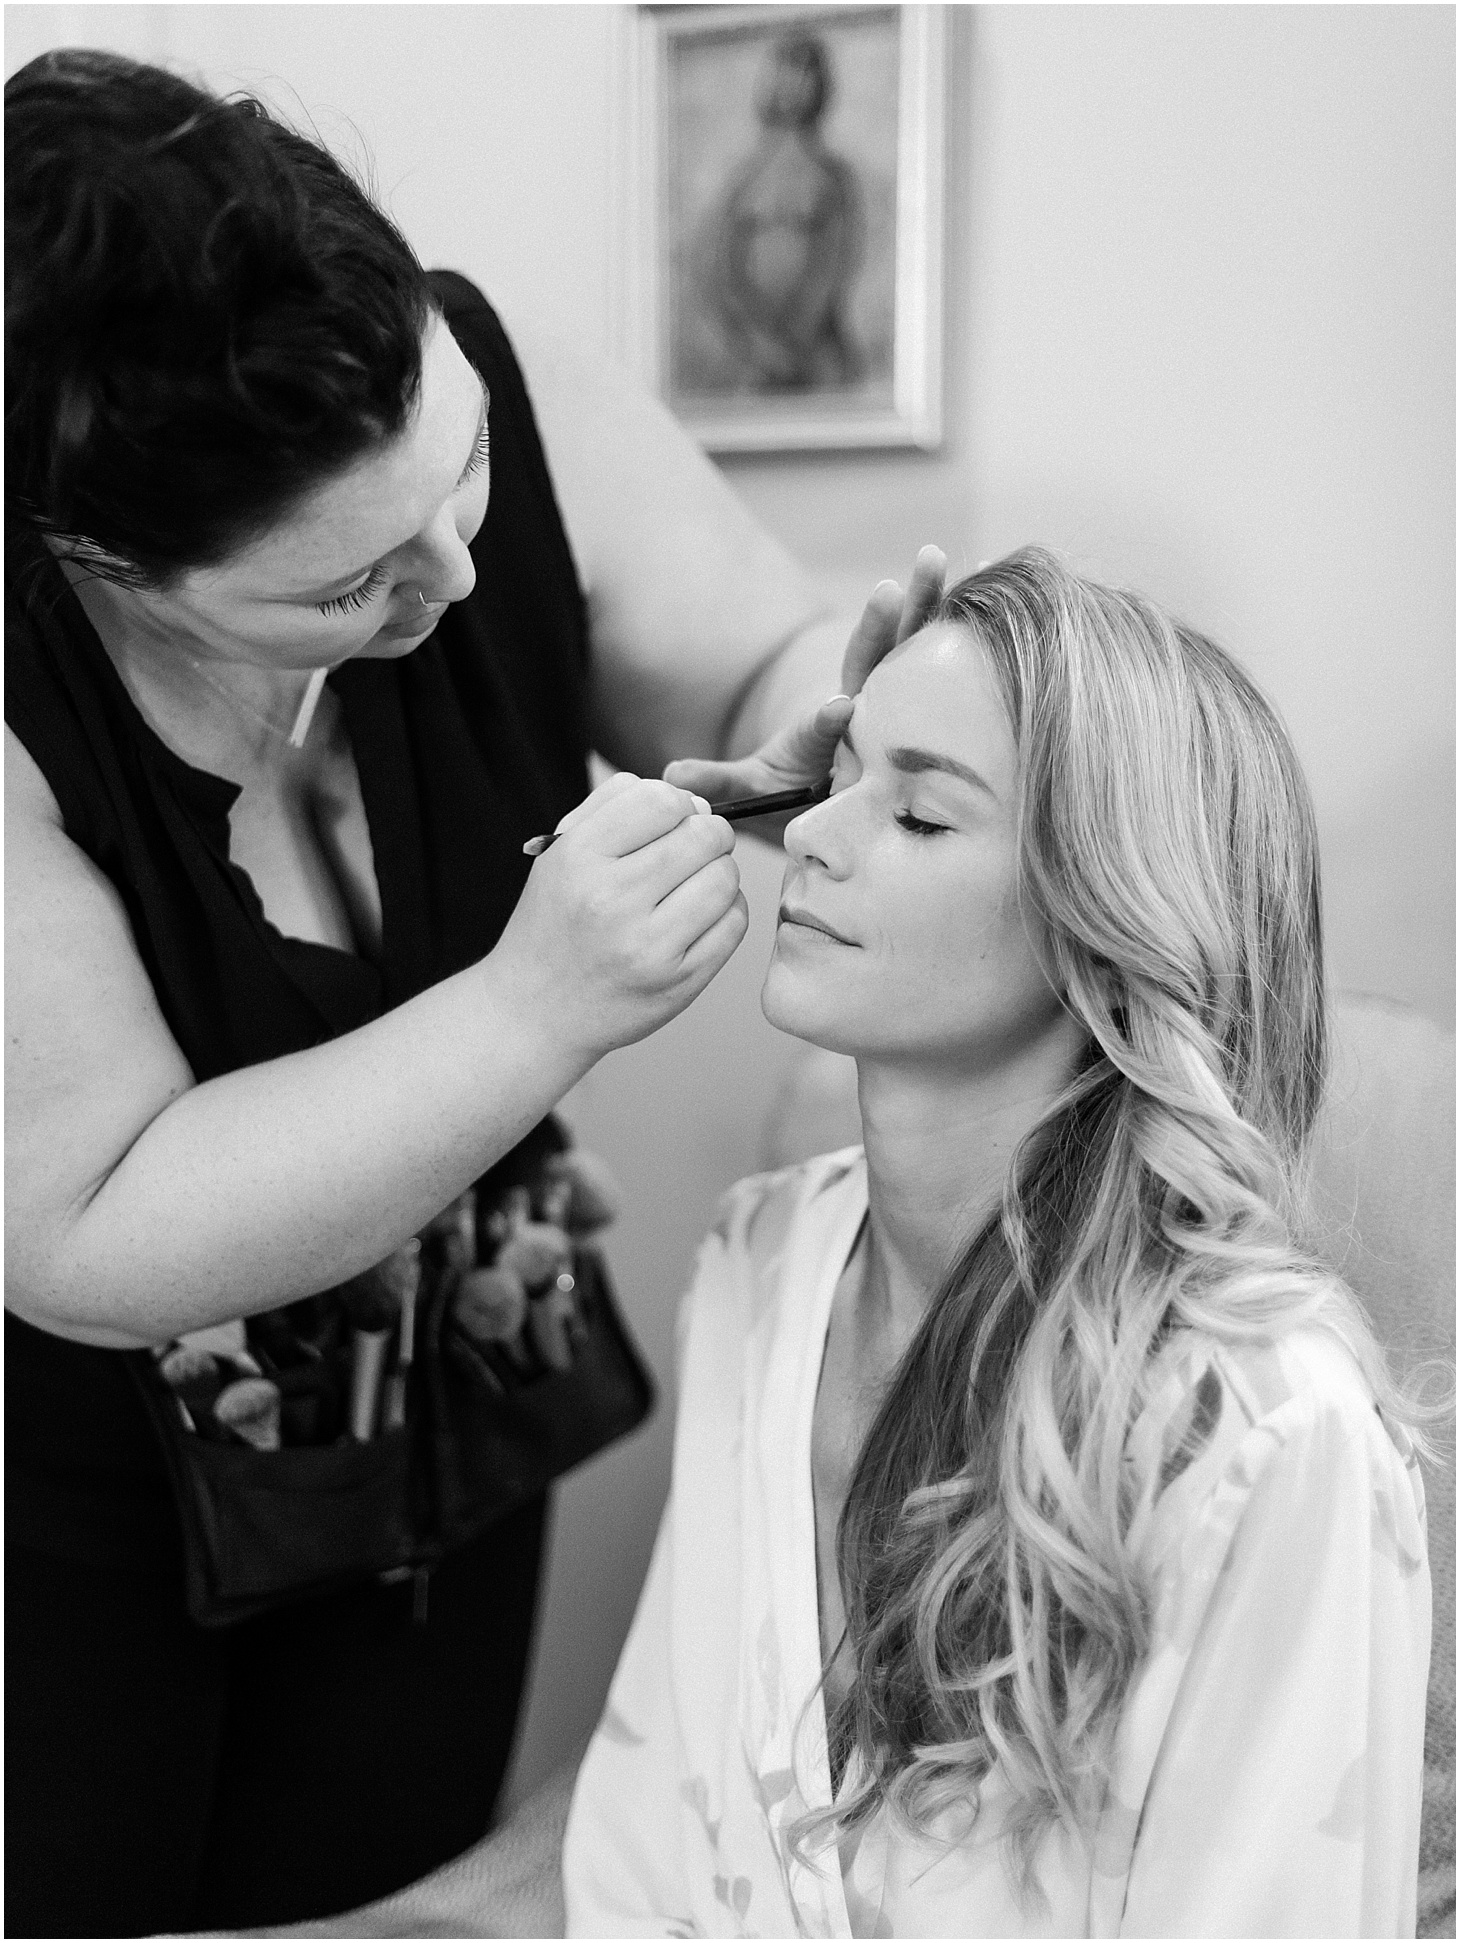 Bride Getting Ready at the Inn at Willow Grove, Green and White Summer Wedding at The Inn at Willow Grove, Ceremony at St. Isidore the Farmer Catholic Church, Sarah Bradshaw Photography, DC Wedding Photographer